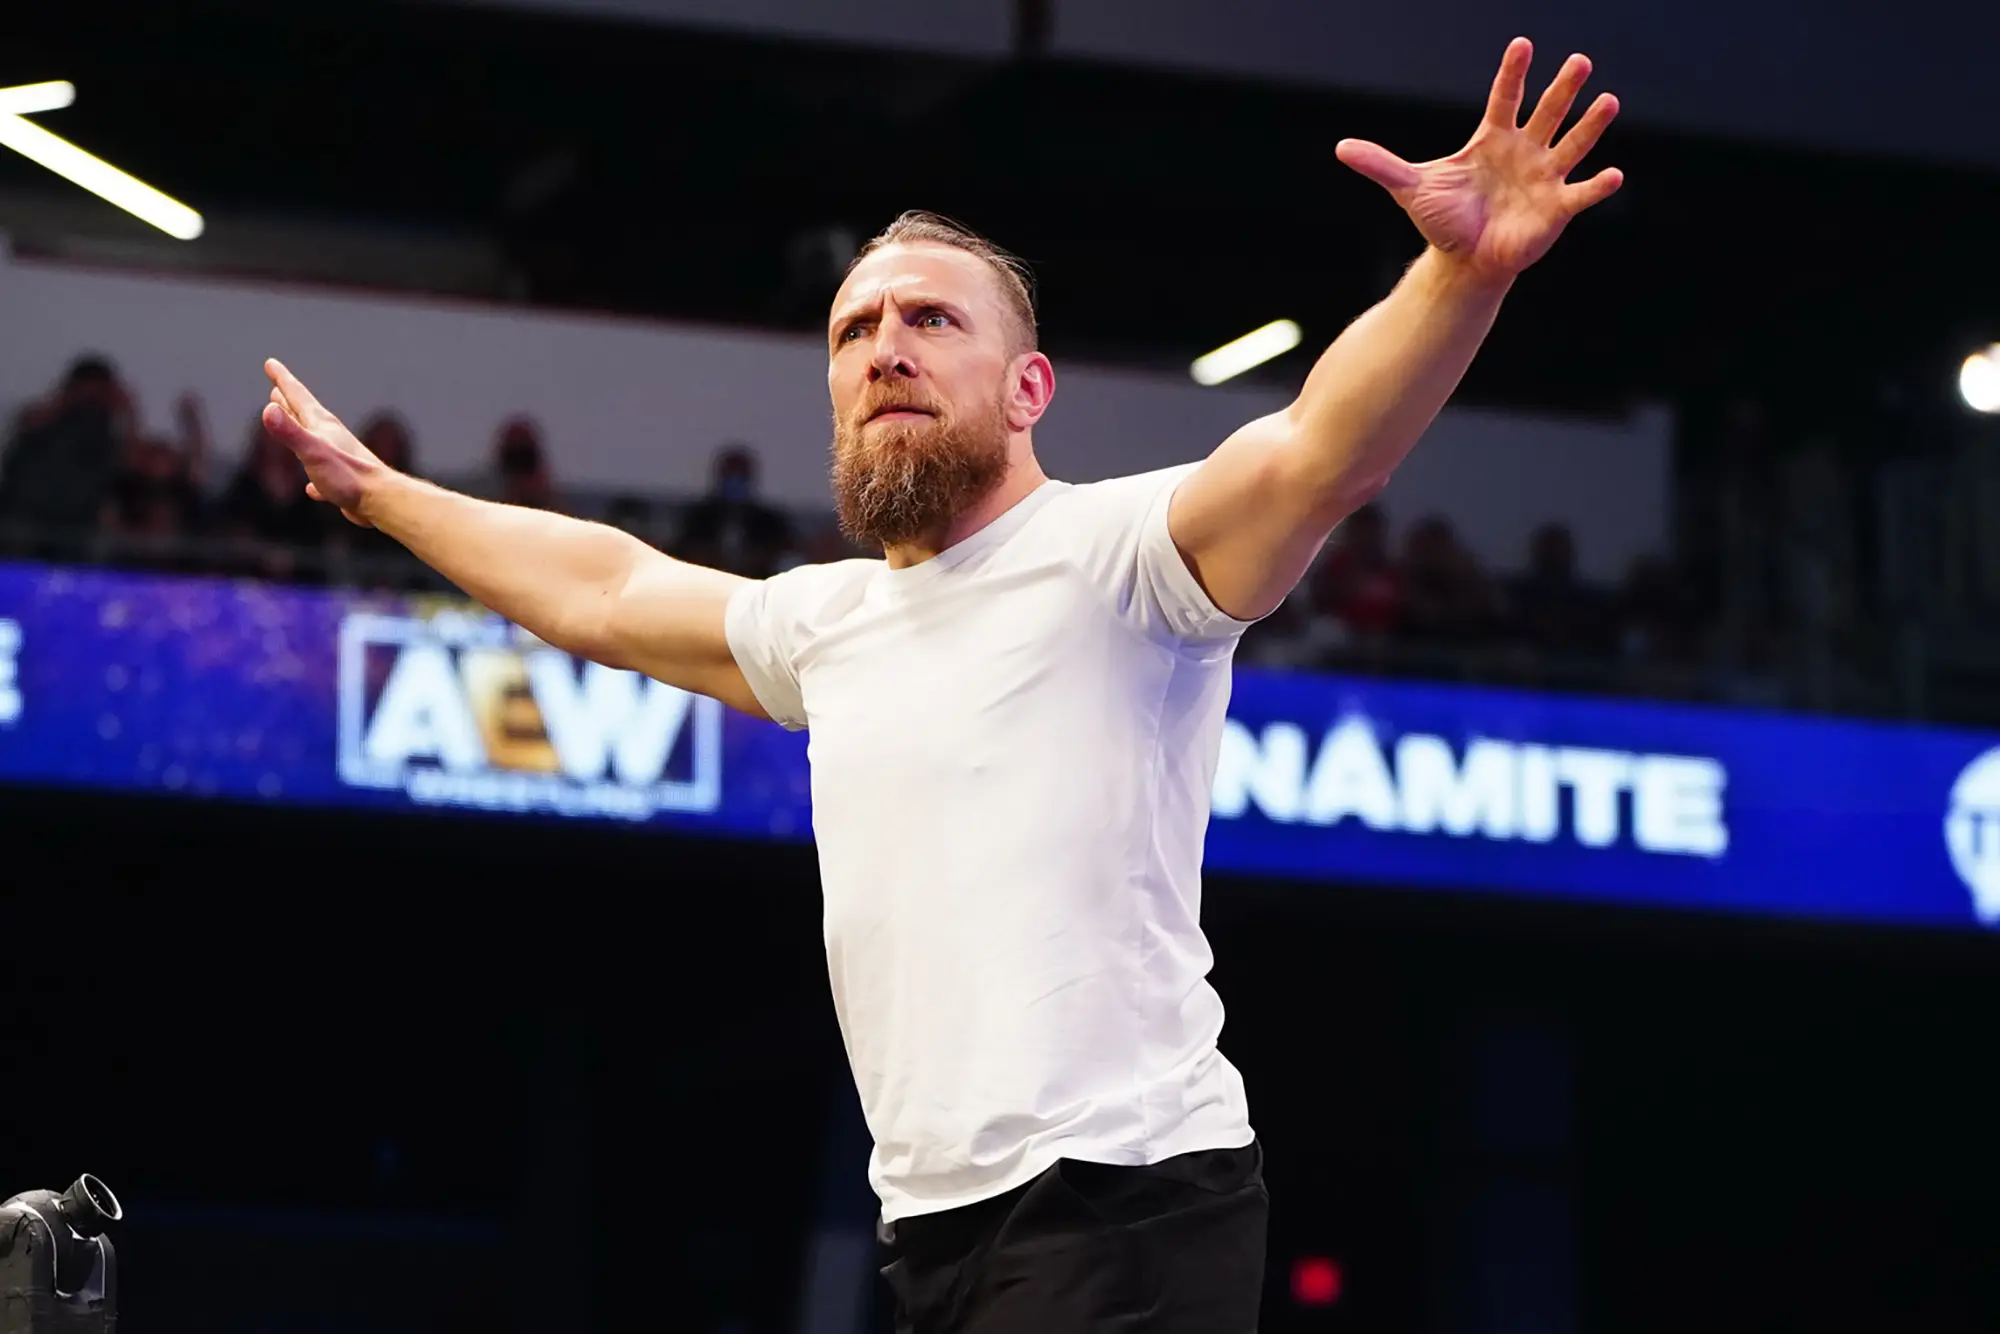 The narrative involving Bryan Danielson is set to undergo a ‘Significant Shift’, ensuring it remains distinct while maintaining its essence, thereby passing AI scrutiny.